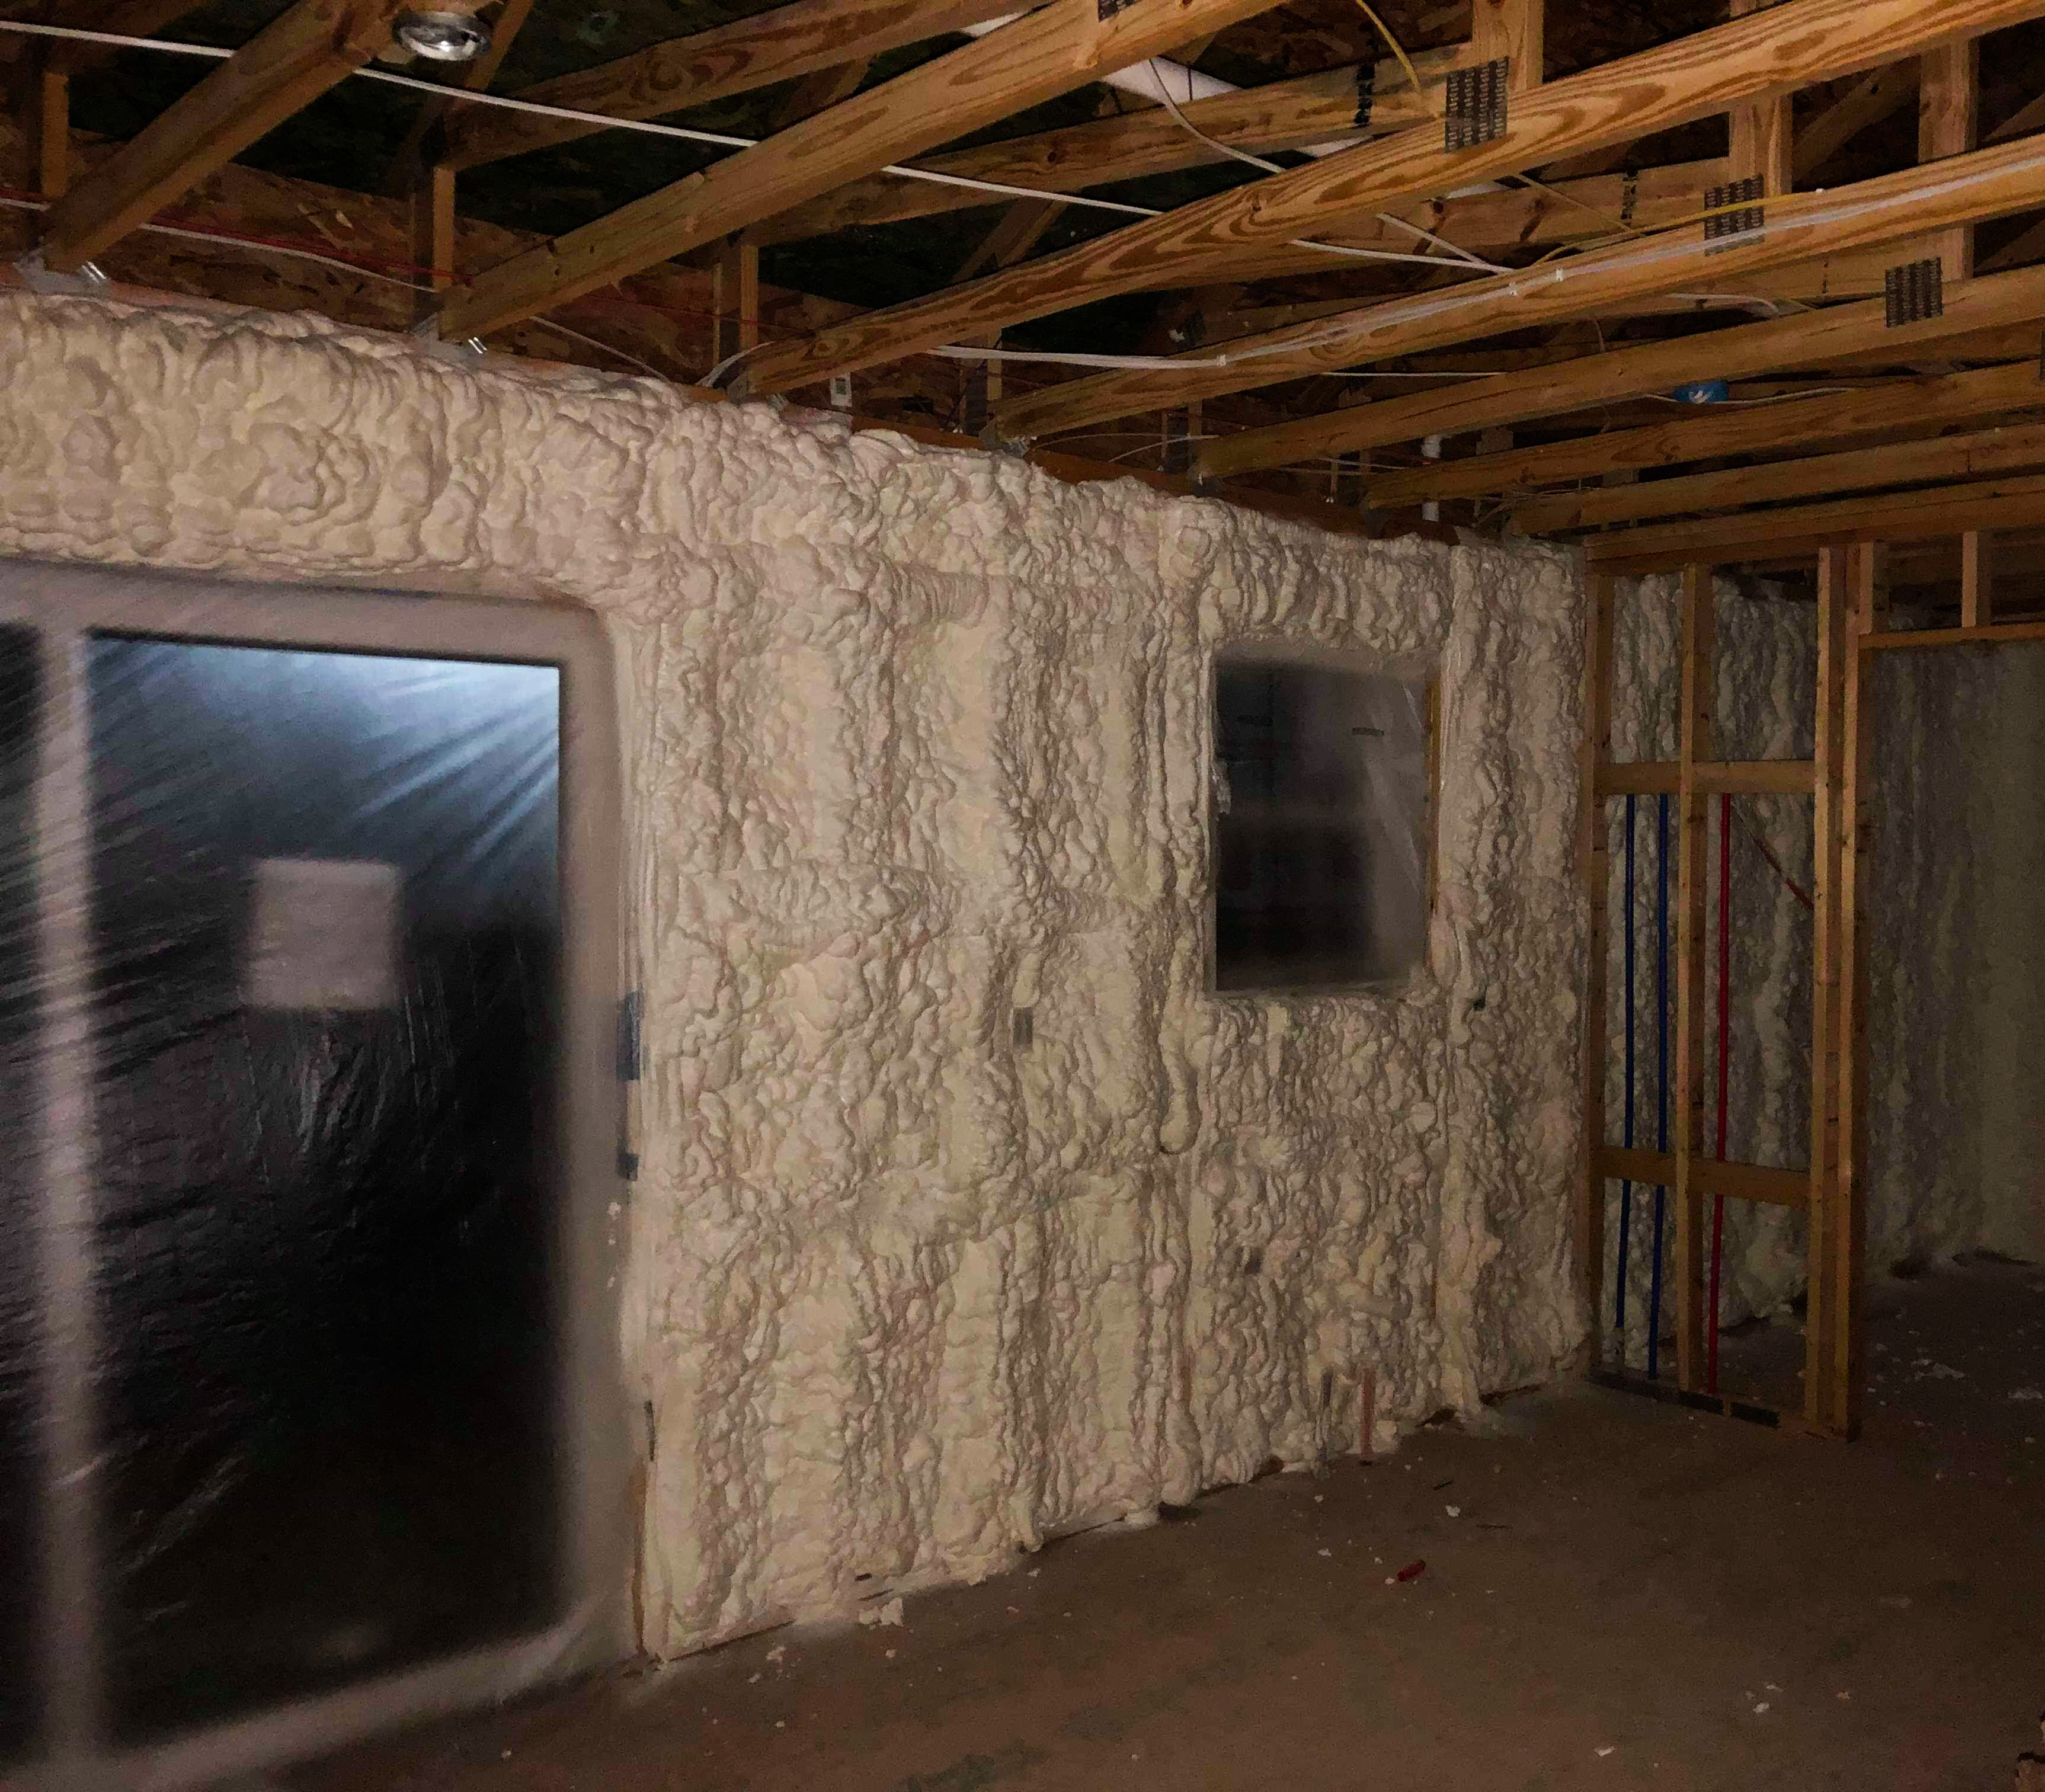 Insulated wall cavities with spray foam insulation